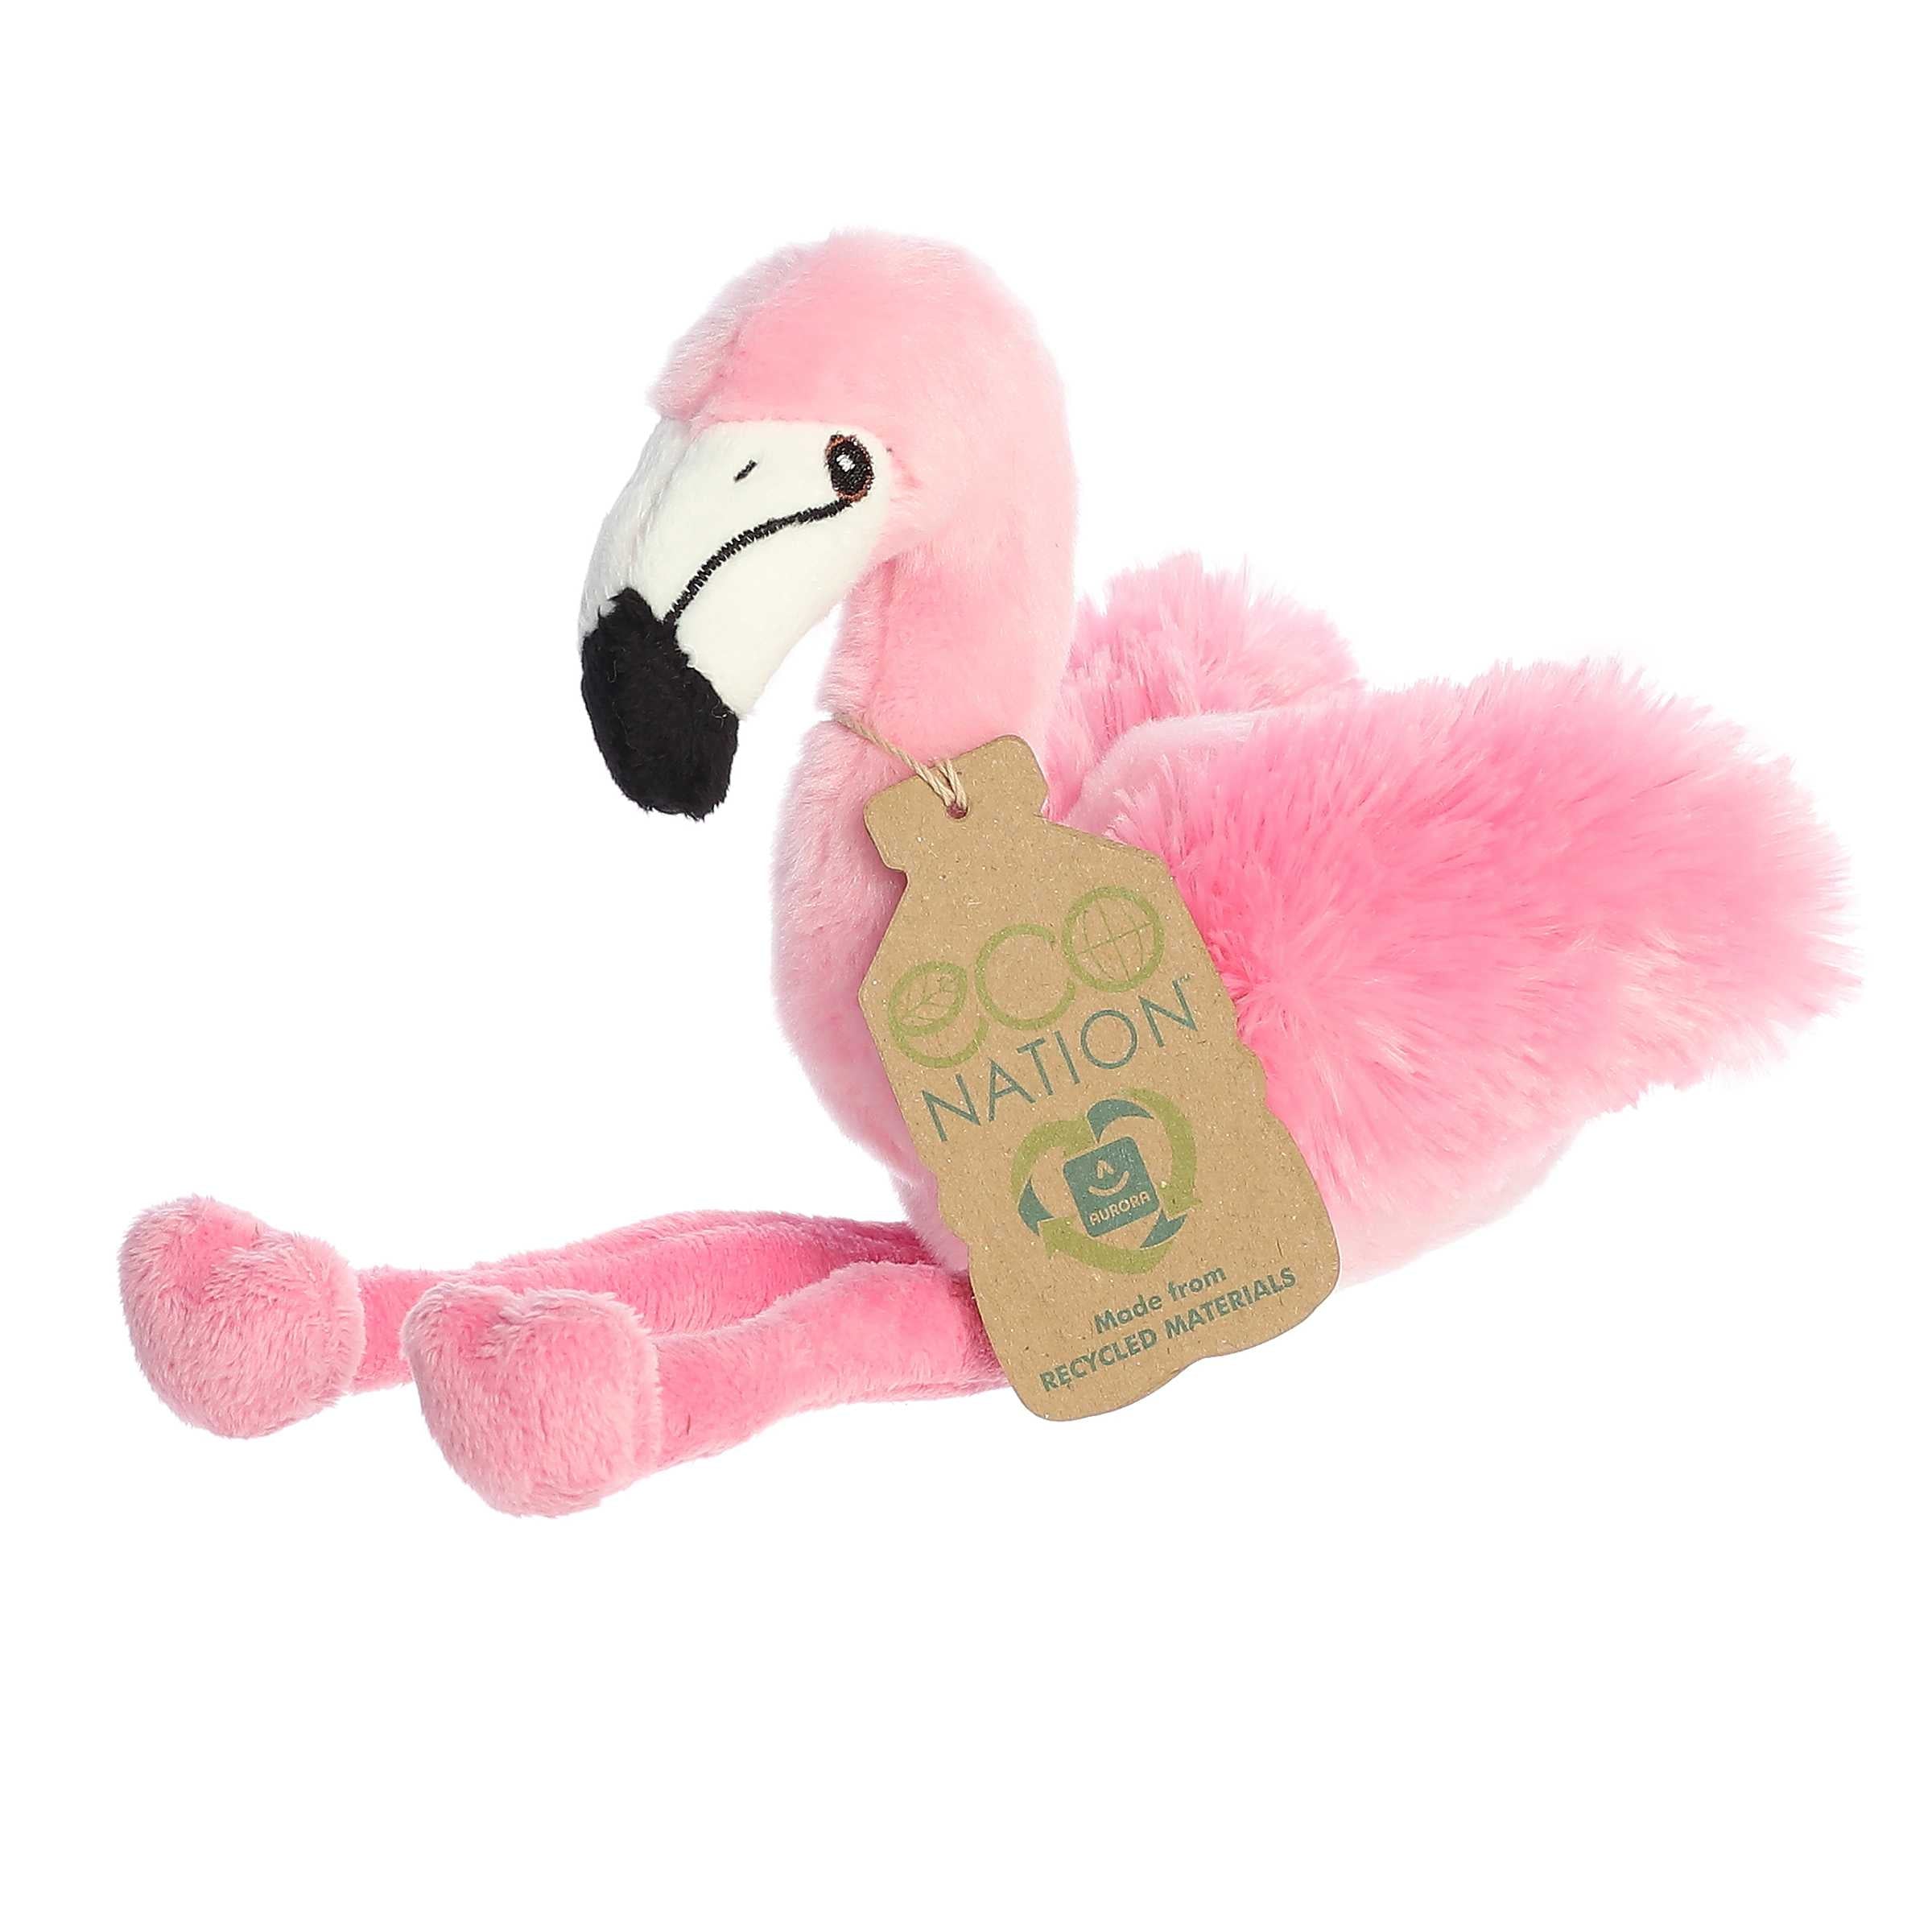 Eco Softie Flamingo Plush, vivid pink, made from recycled materials, with an 'Eco Nation' tag around its neck.